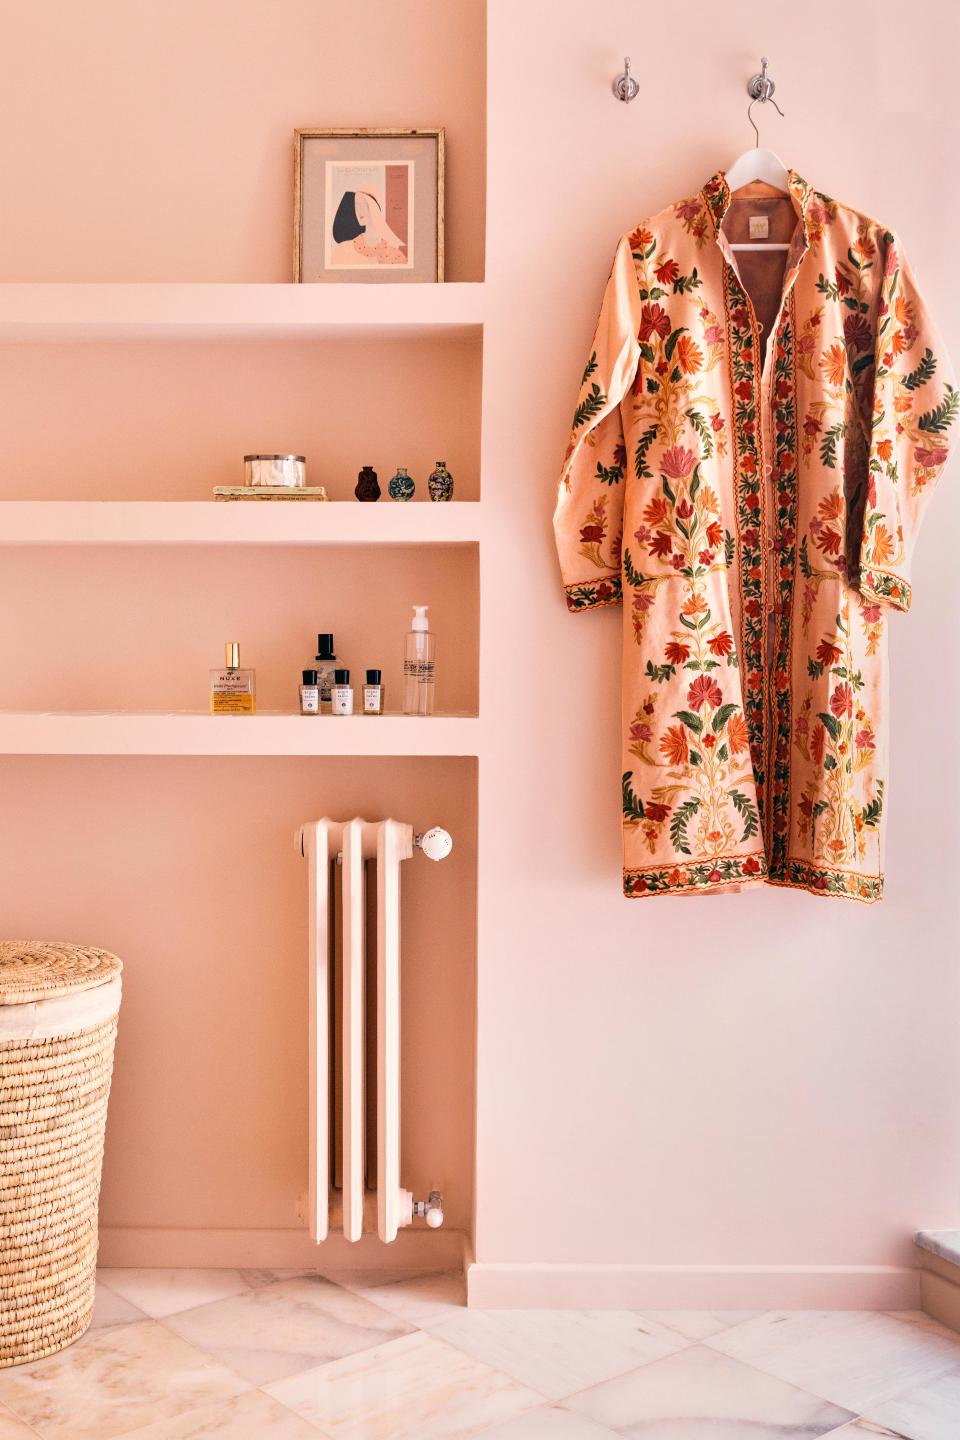 Miniature apothecary jars line the shelves in the primary bathroom. The brilliant kaftan-style coat, acquired from Lol Roma, happily doubles as decor.